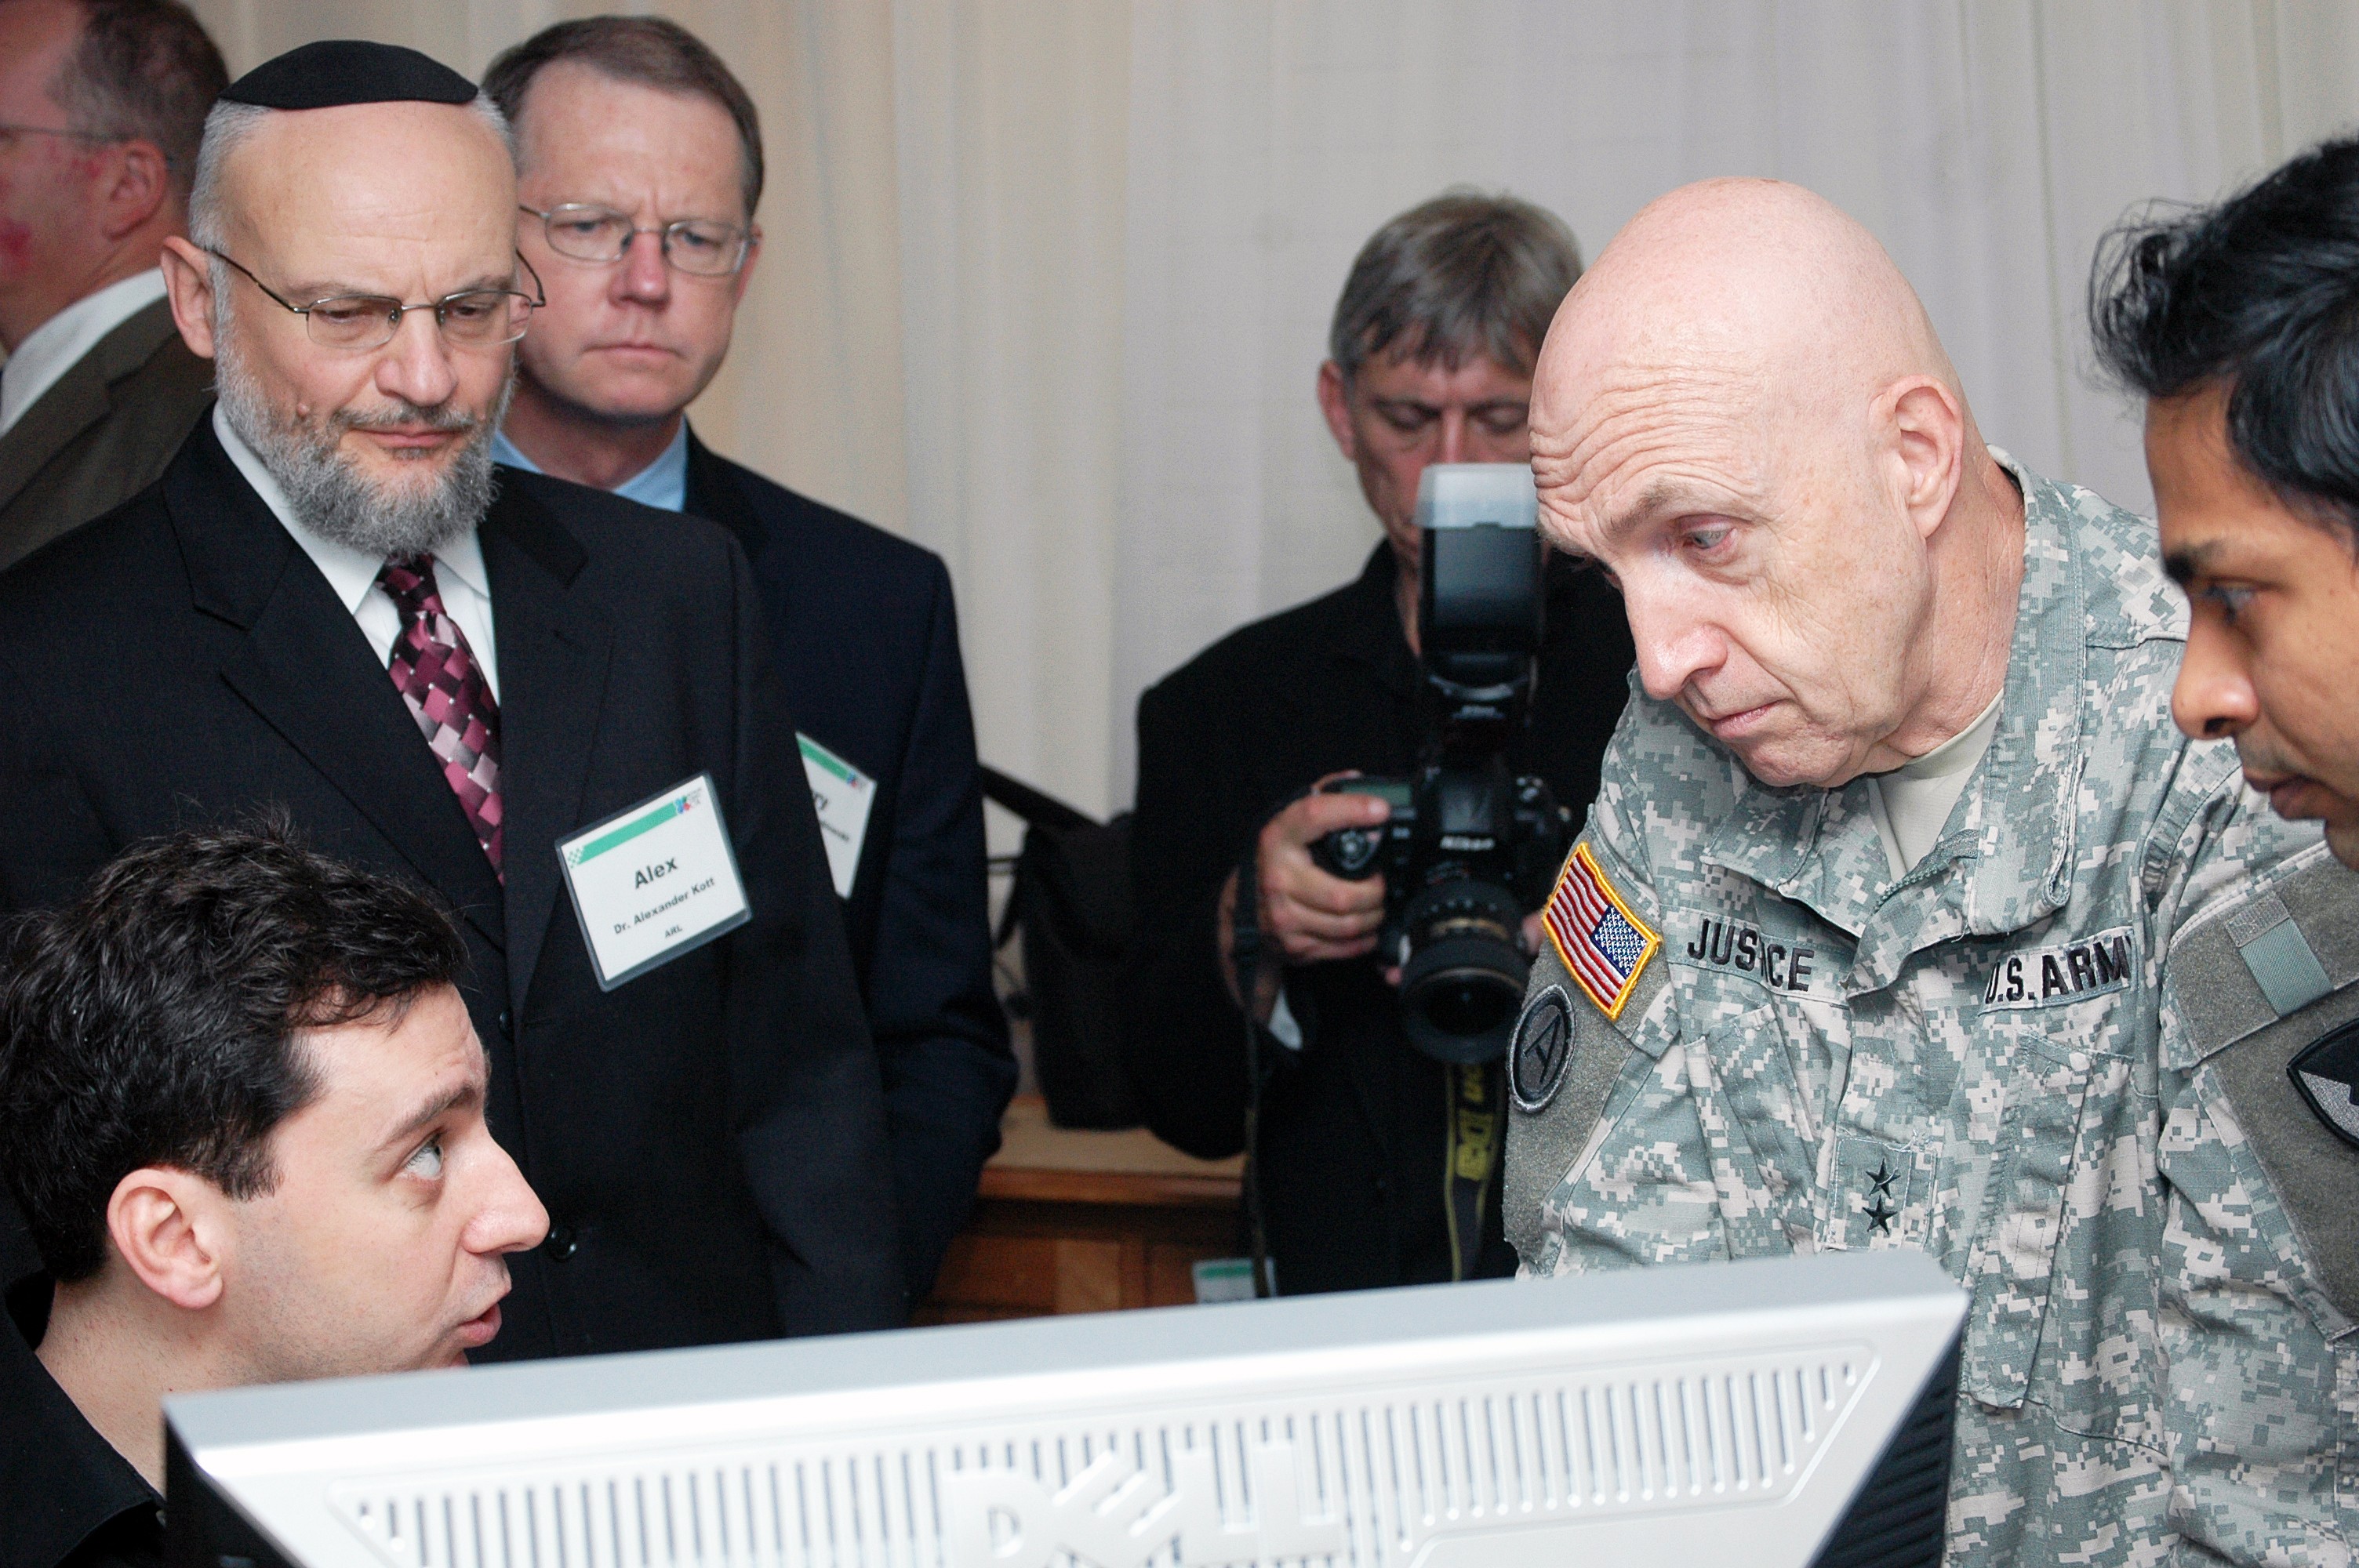 RDECOM Launches Alliance To Study Network Science Article The United States Army